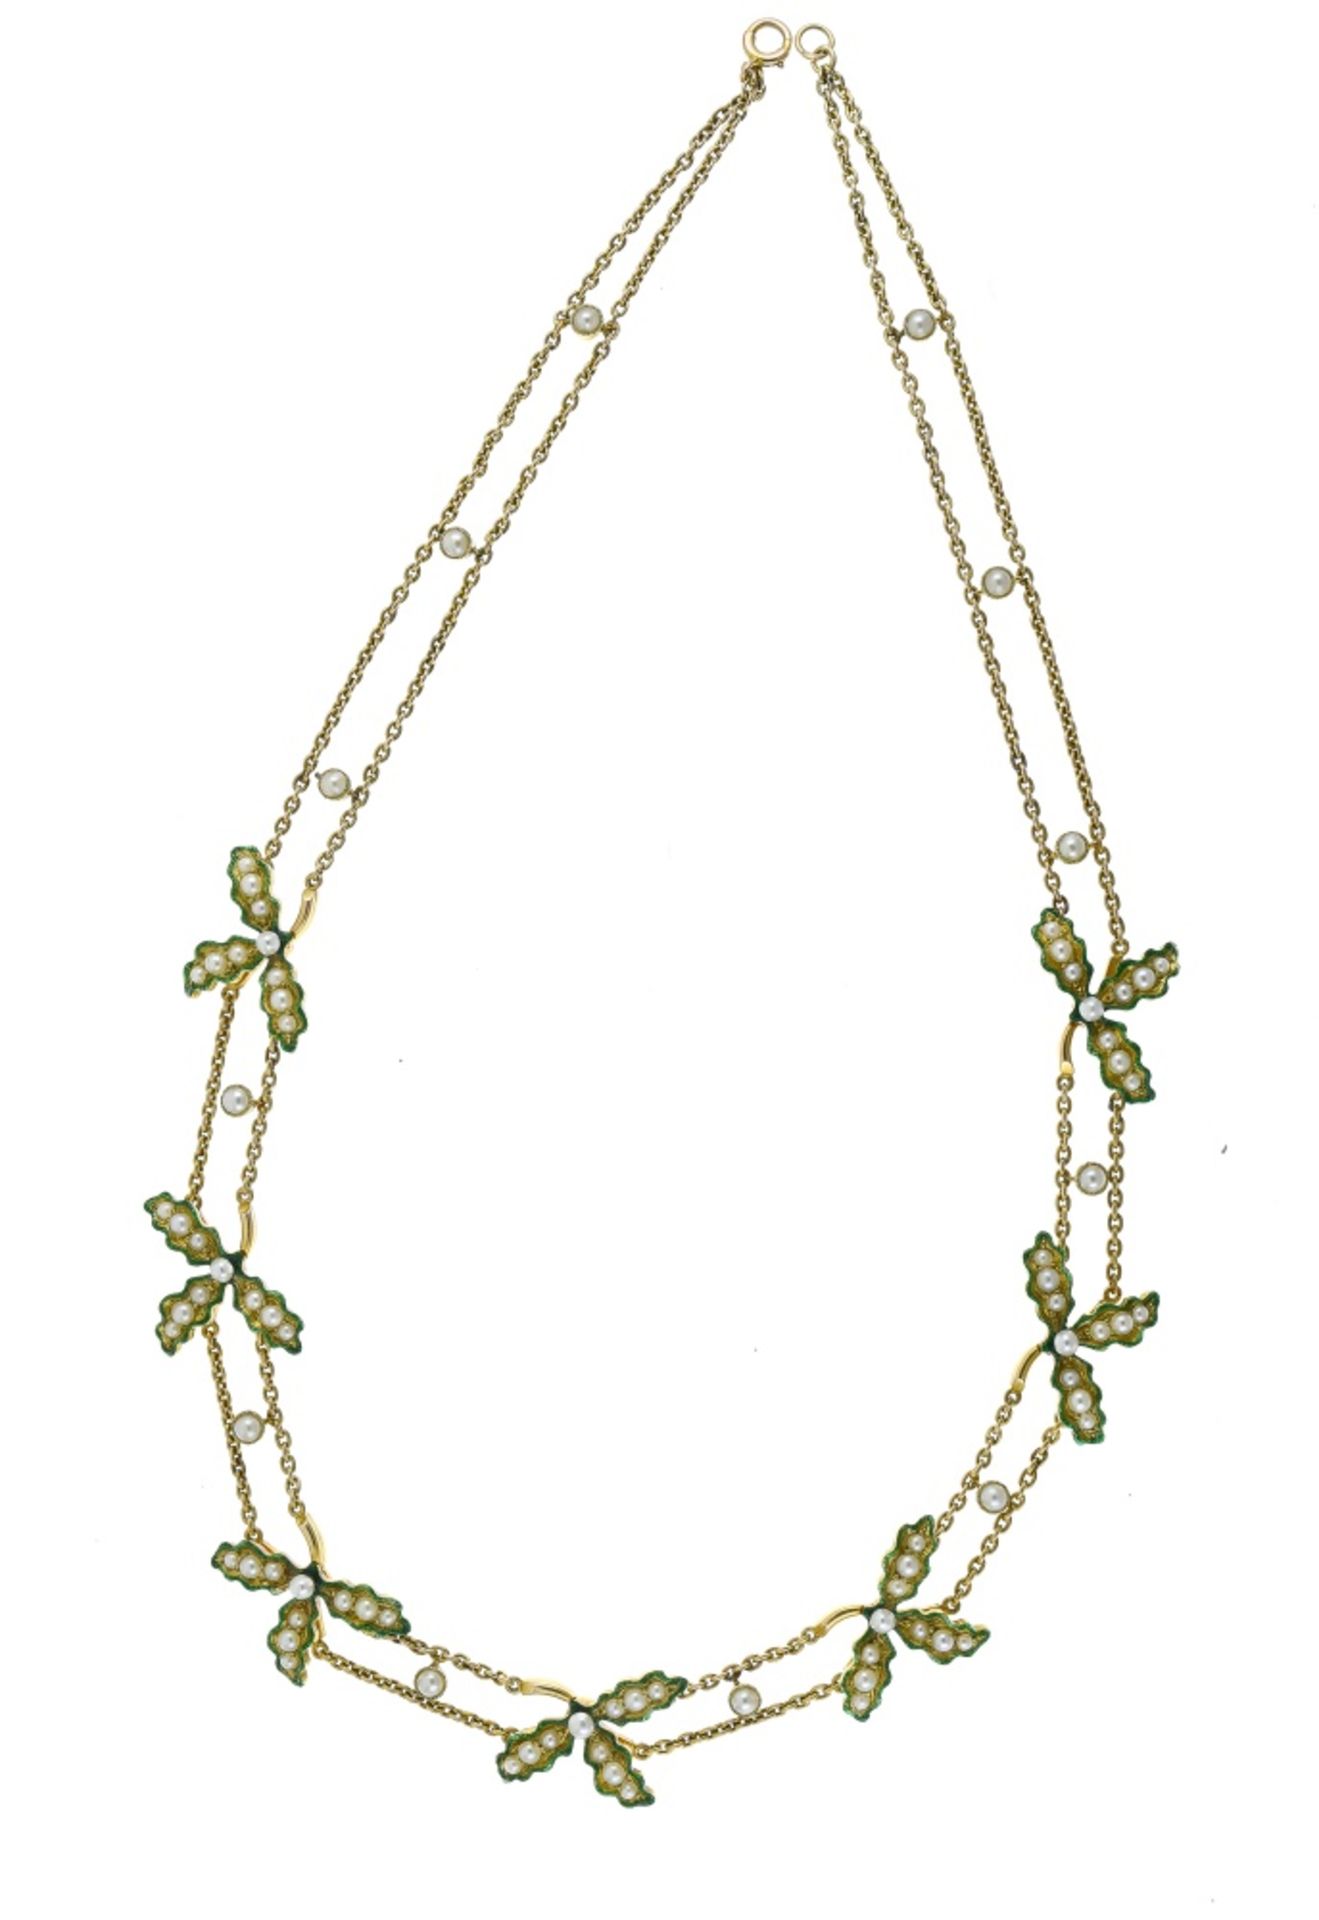 R.S. & A.P. Cufflin Romantic parure 18 kt and 15 kt yellow gold, composed of a choker necklace, a - Image 4 of 6